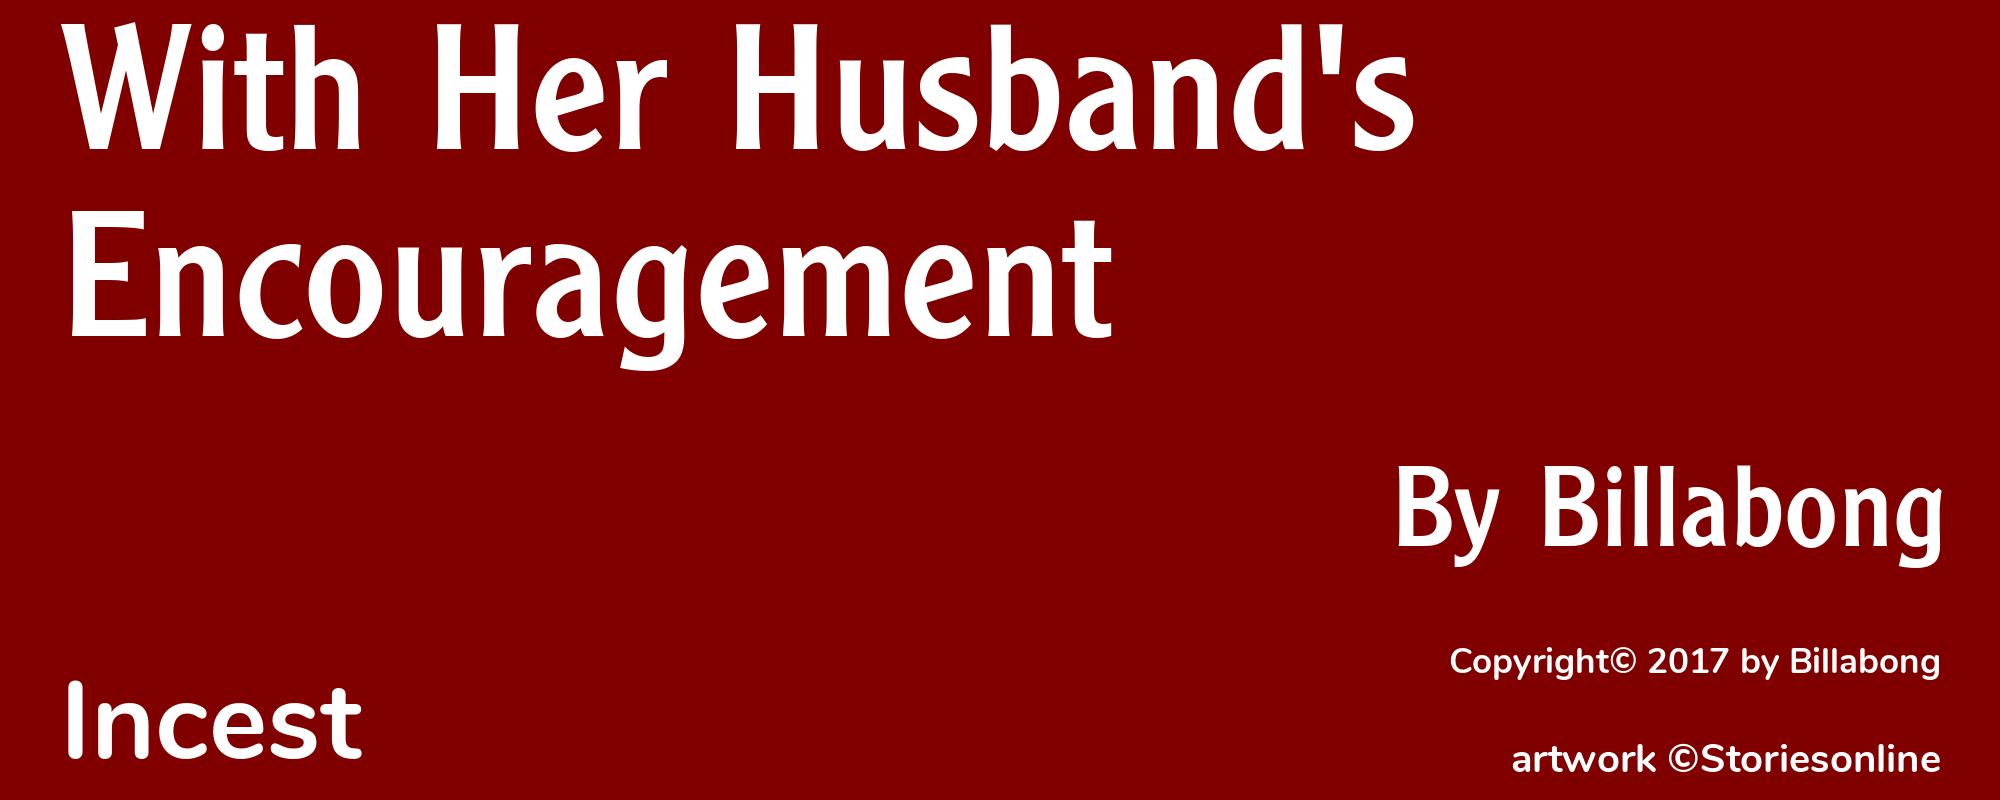 With Her Husband's Encouragement - Cover